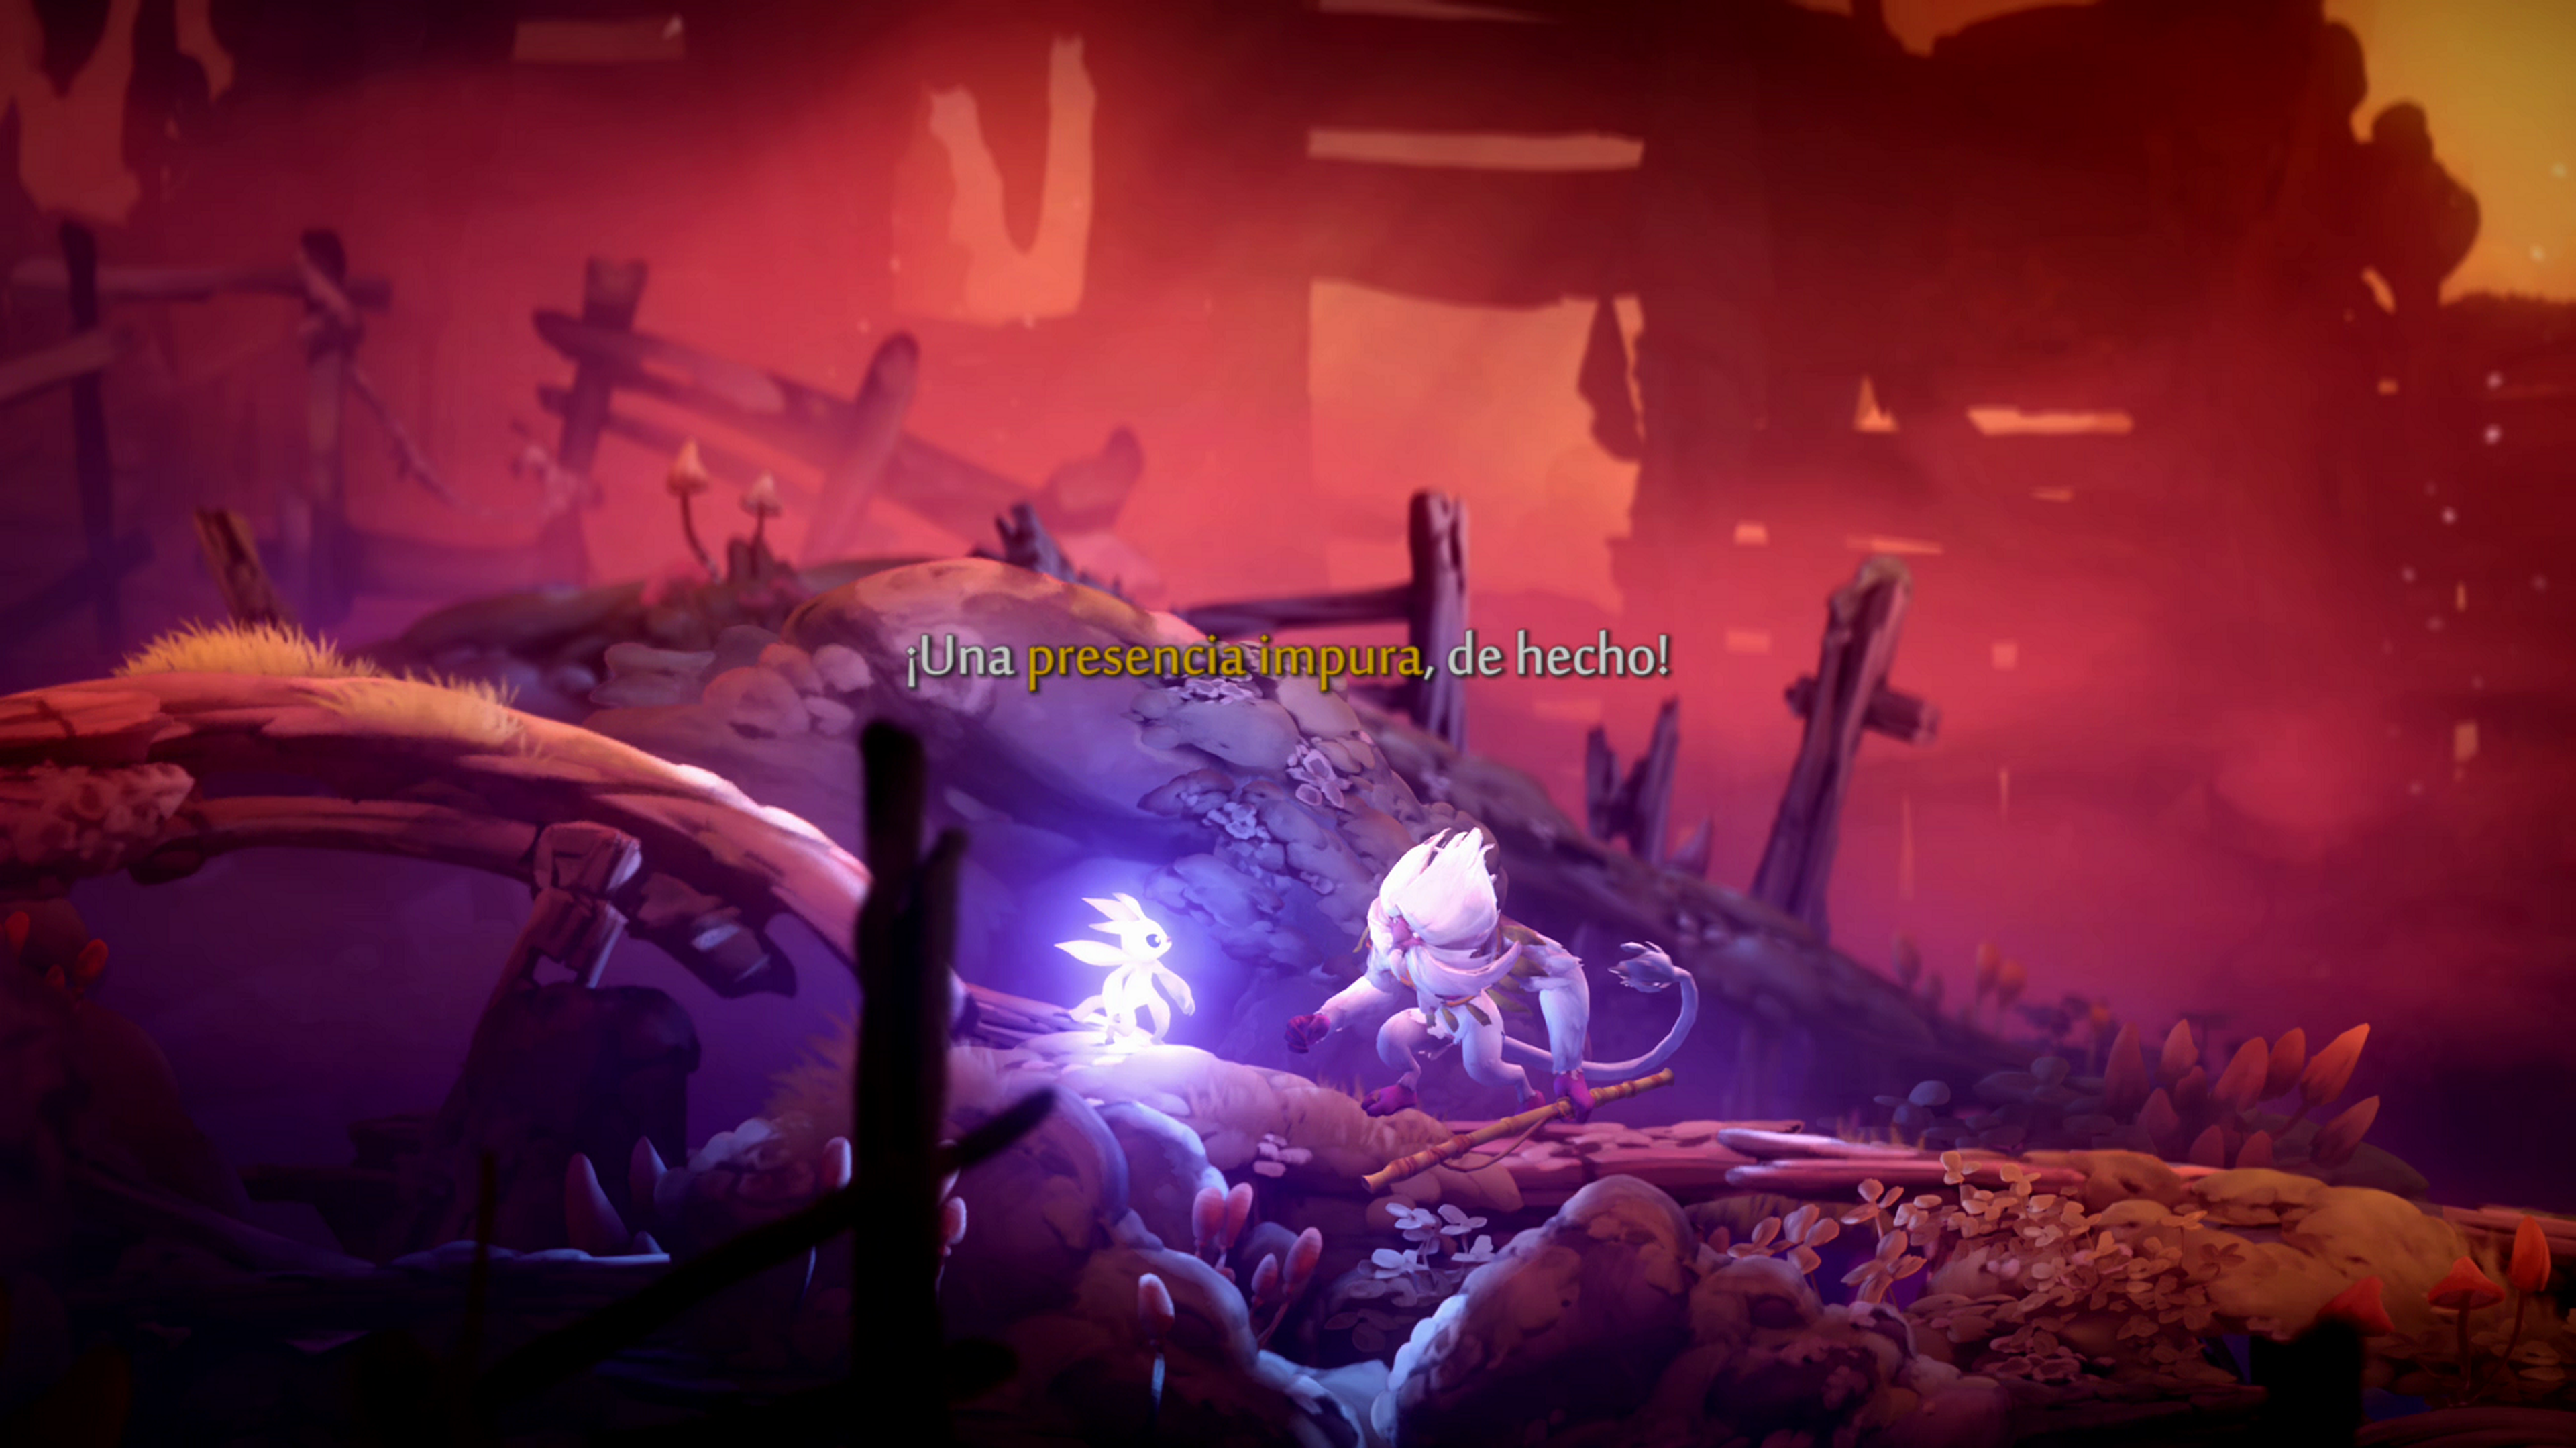 Análisis de Ori and the Will of the Wisps para Xbox One y Windows 10